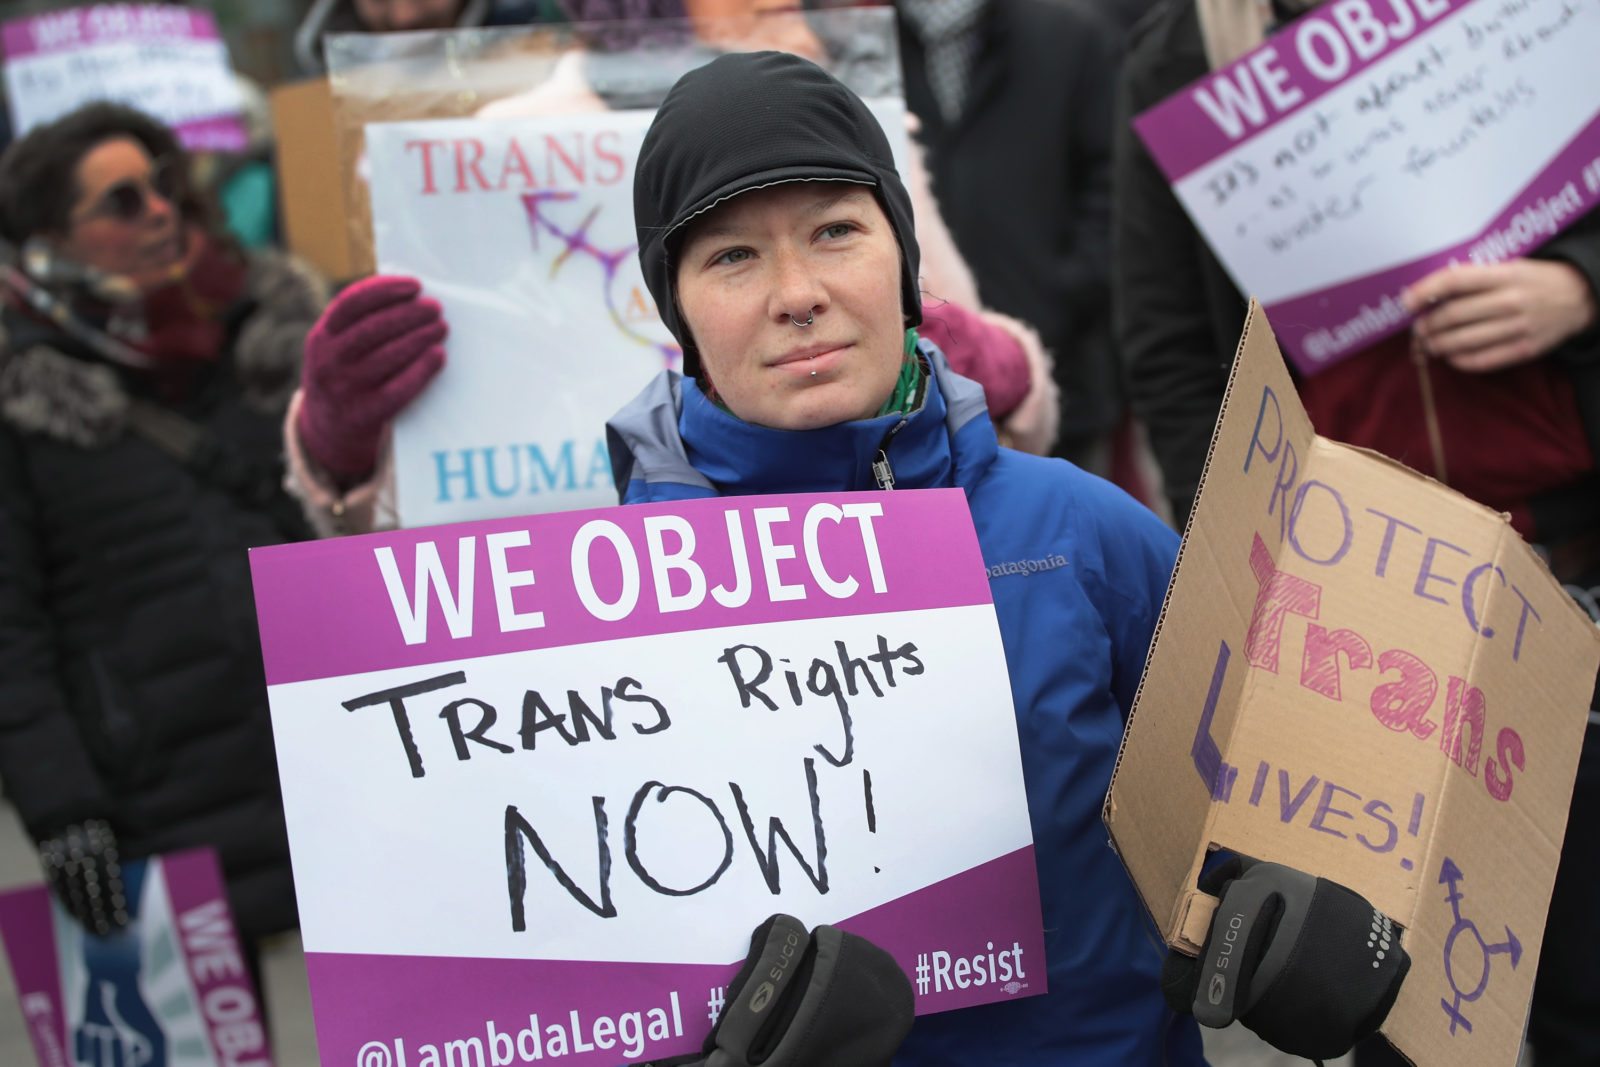 CHICAGO, IL - FEBRUARY 25: Demonstrators protest for transgender rights on February 25, 2017 in Chicago, Illinois. The demonstrators were angry with President Donald Trumps recent decision to reverse the Obama-era policy requiring public schools to allow transgender students to use the bathroom that corresponds with their gender identity. (Photo by Scott Olson/Getty Images)